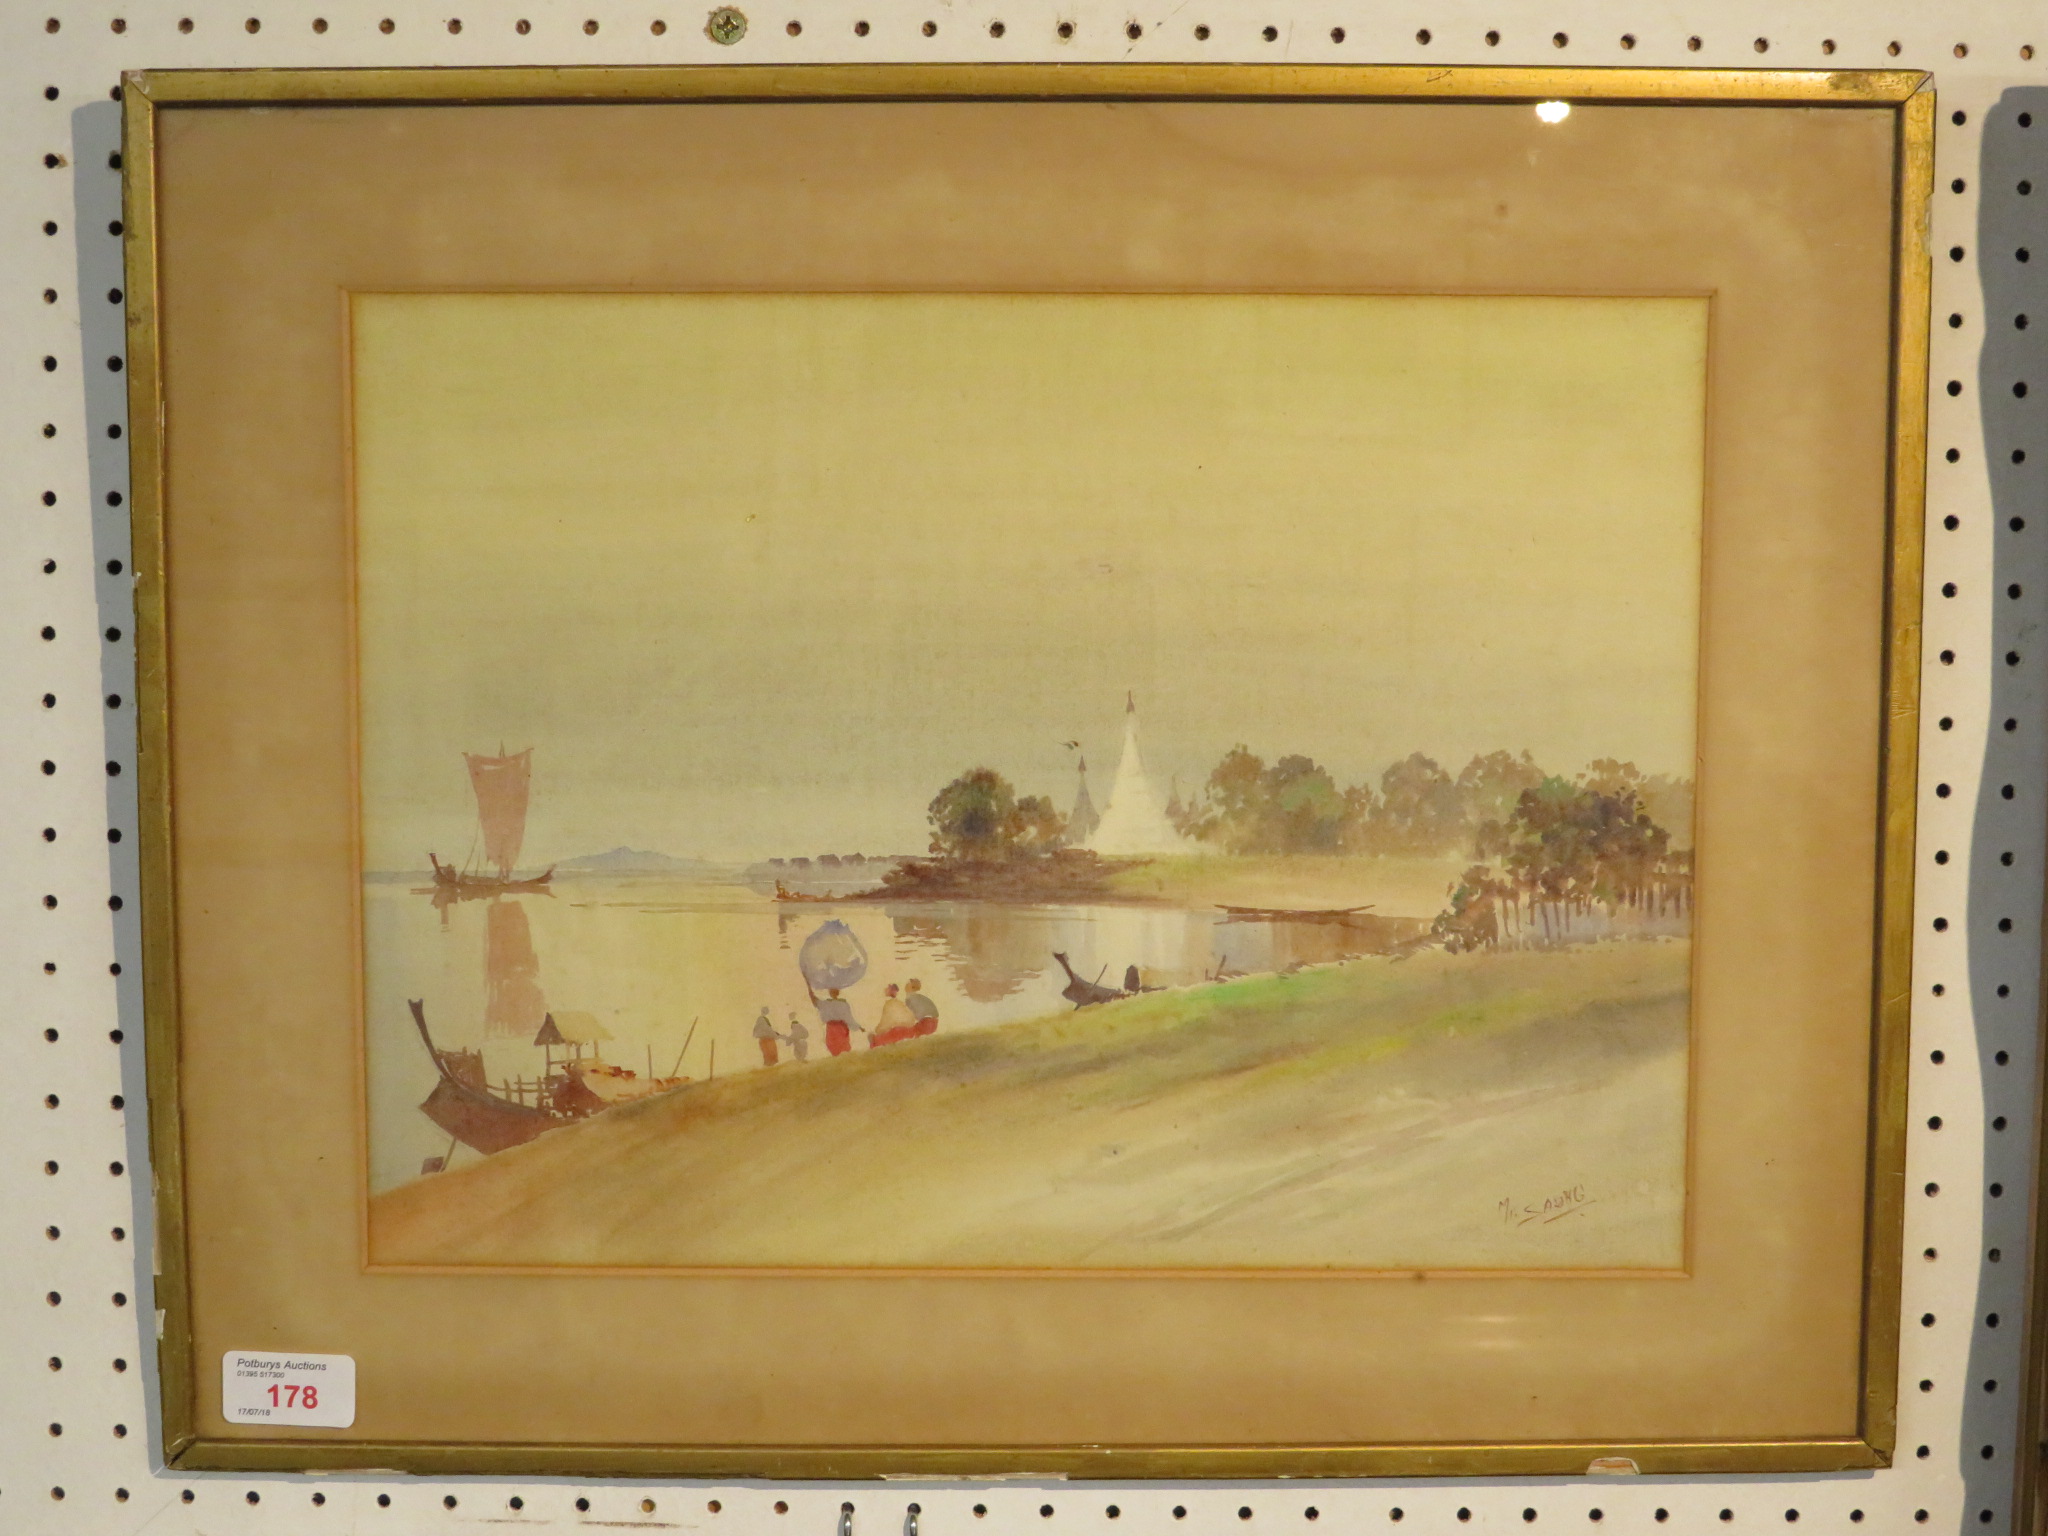 Far eastern lake shore with figures and tents, watercolour, signed MC Saung lower right, (27cm x - Image 2 of 2